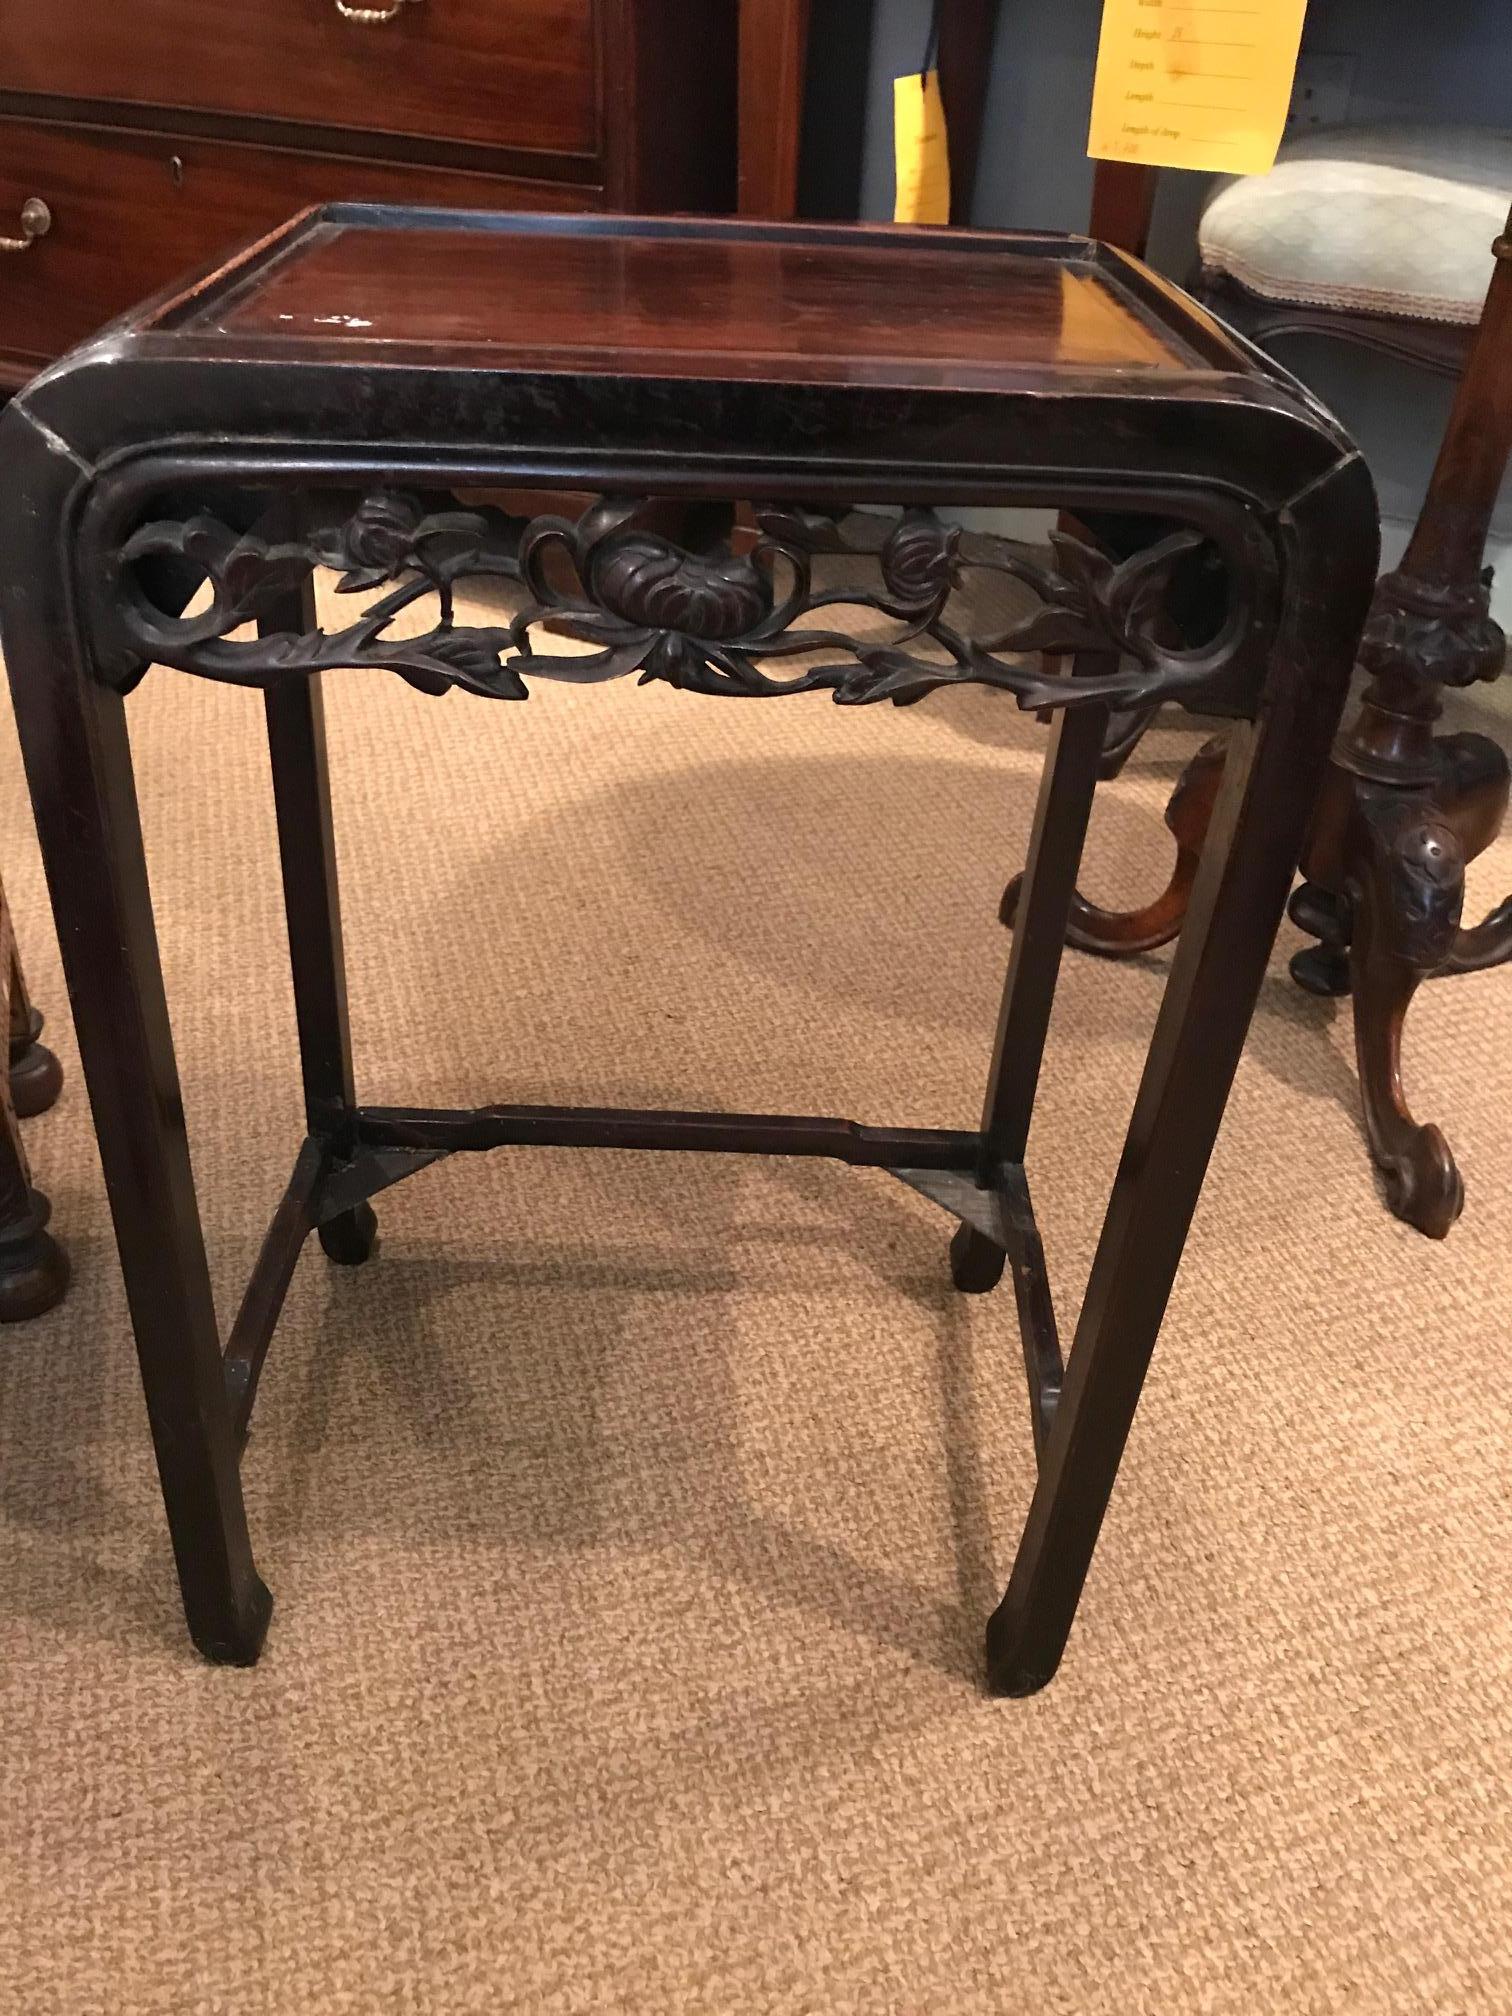 19th Century Chinese Cherrywood Occasional Table In Excellent Condition For Sale In Dublin 8, IE